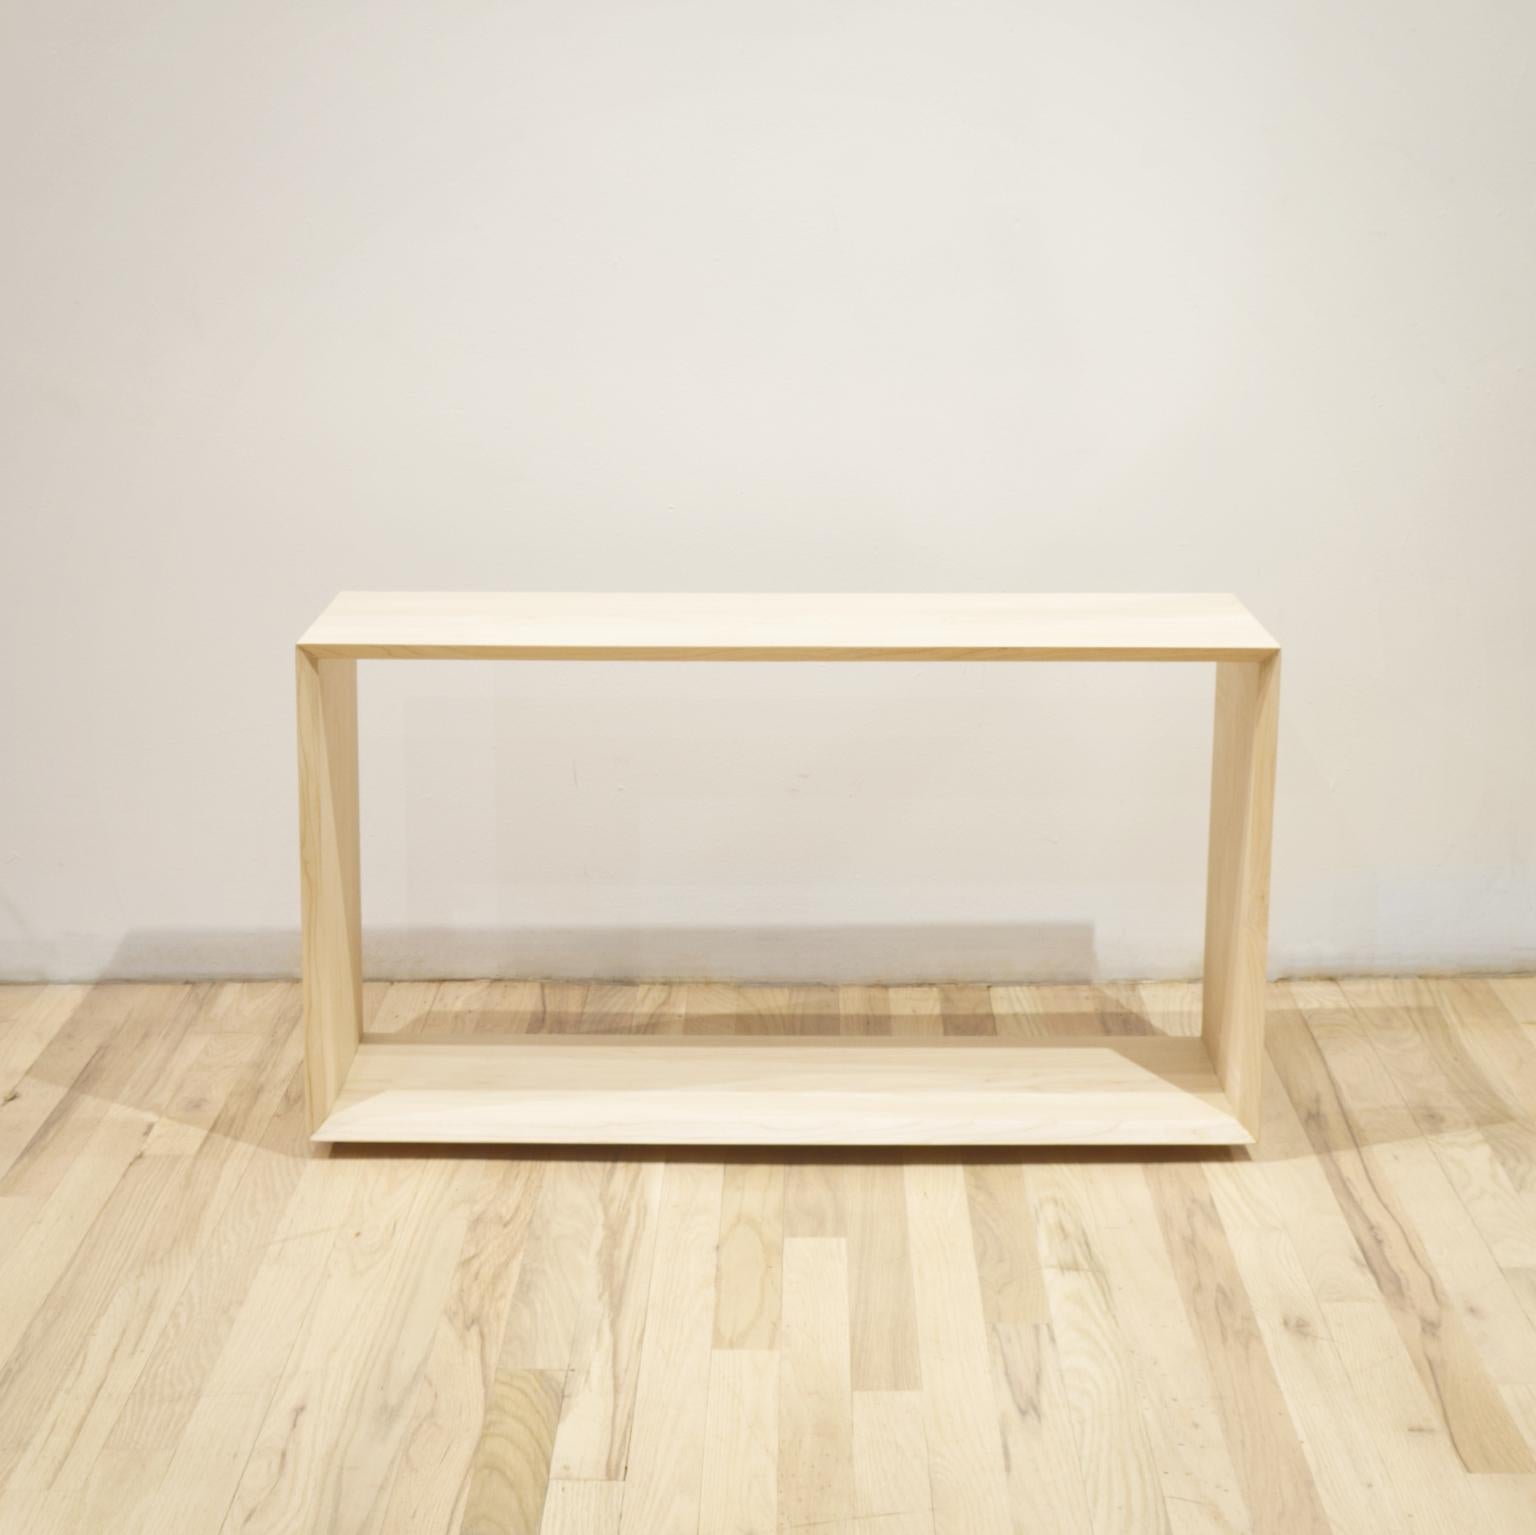 The simple frame table can be used as a coffee, display, and accent table for your rare accoutrement. Waterfall grain matched edges meet in double mitered joints. This table is as versatile as your imagination. 


Own a figure ground